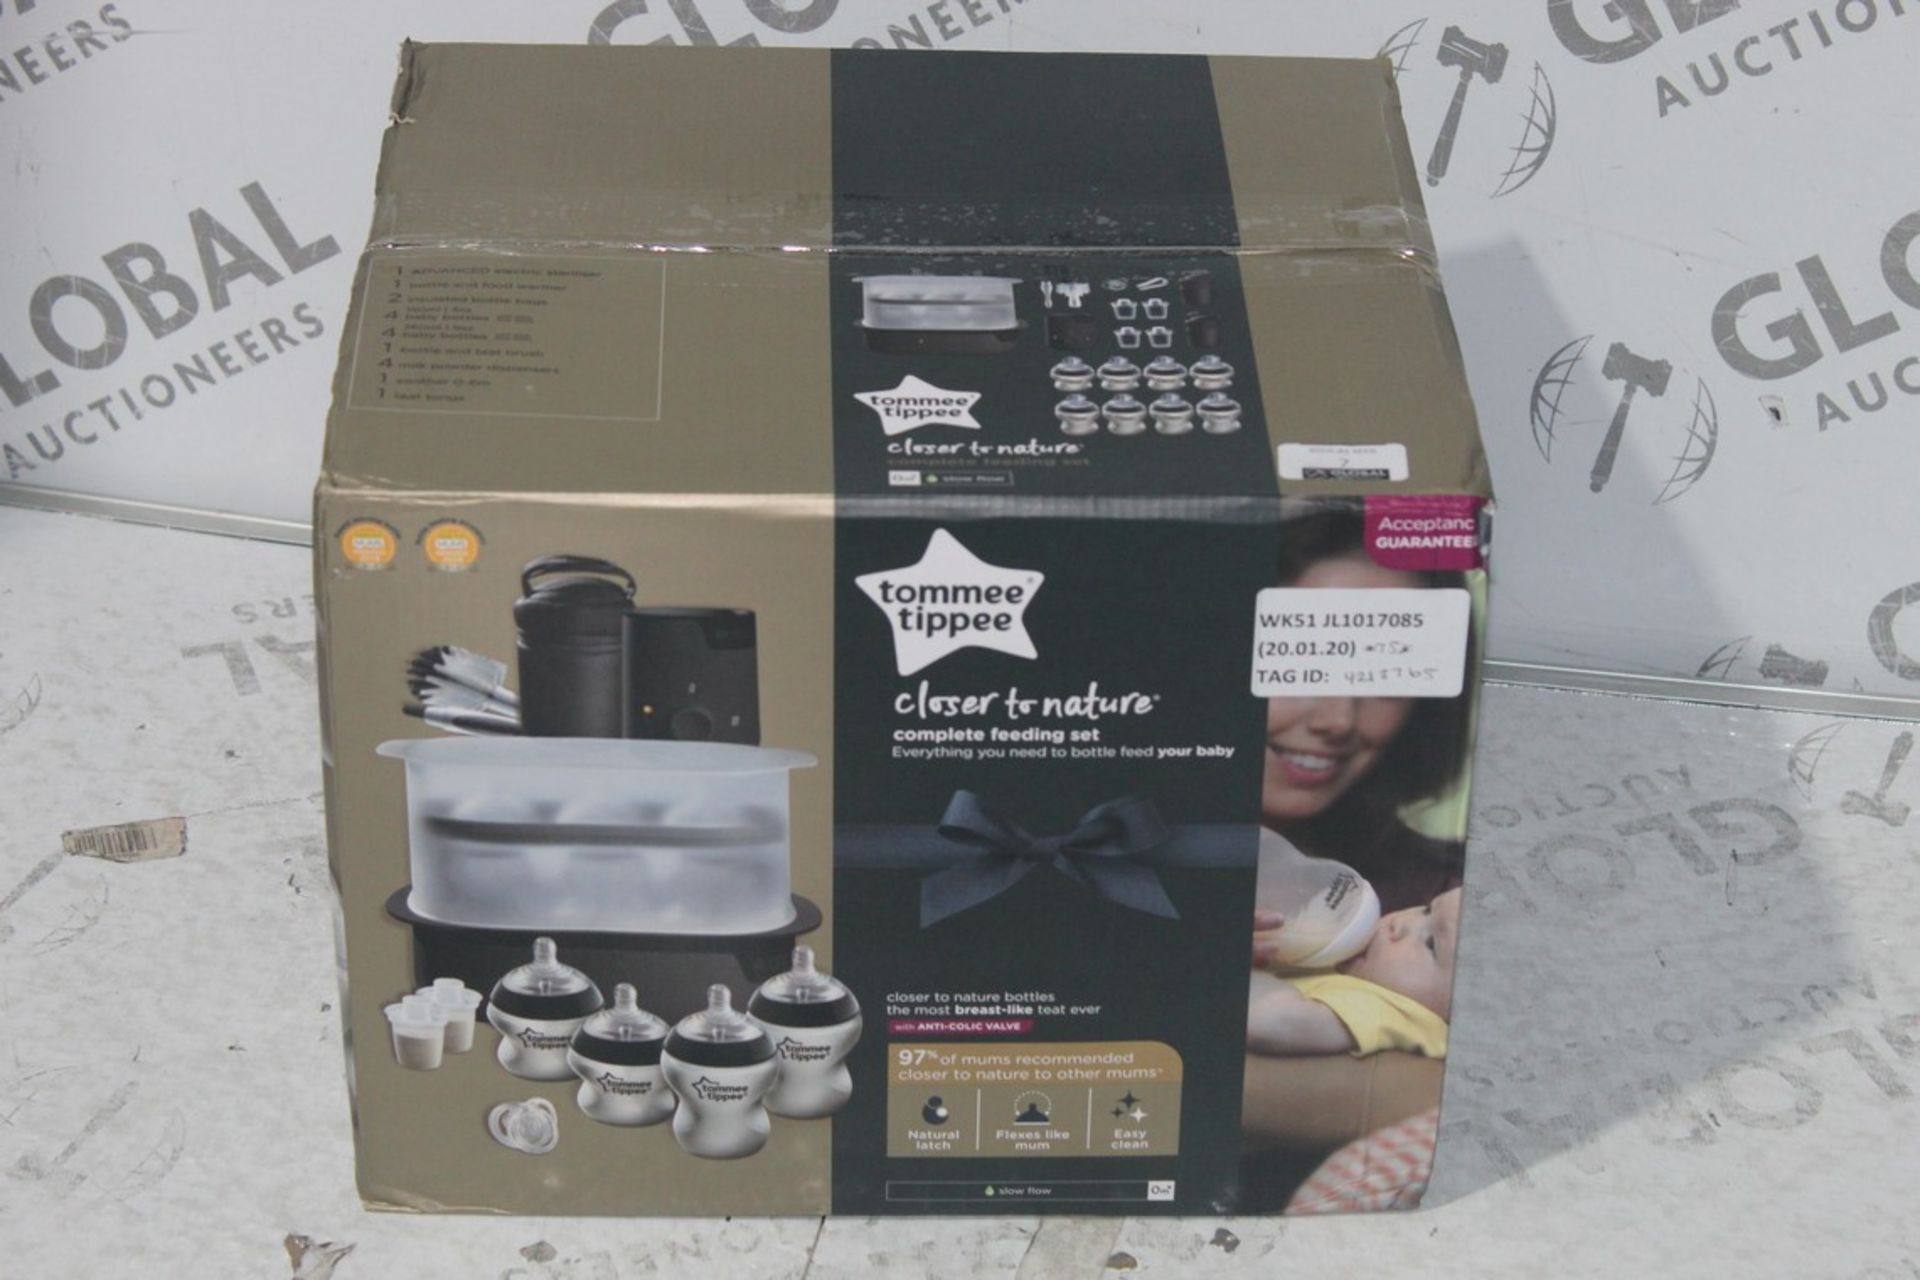 Tommee Tippee Closer to Nature Complete Feeding Set RRP £75 (4213765) (Public Viewing and Appraisals